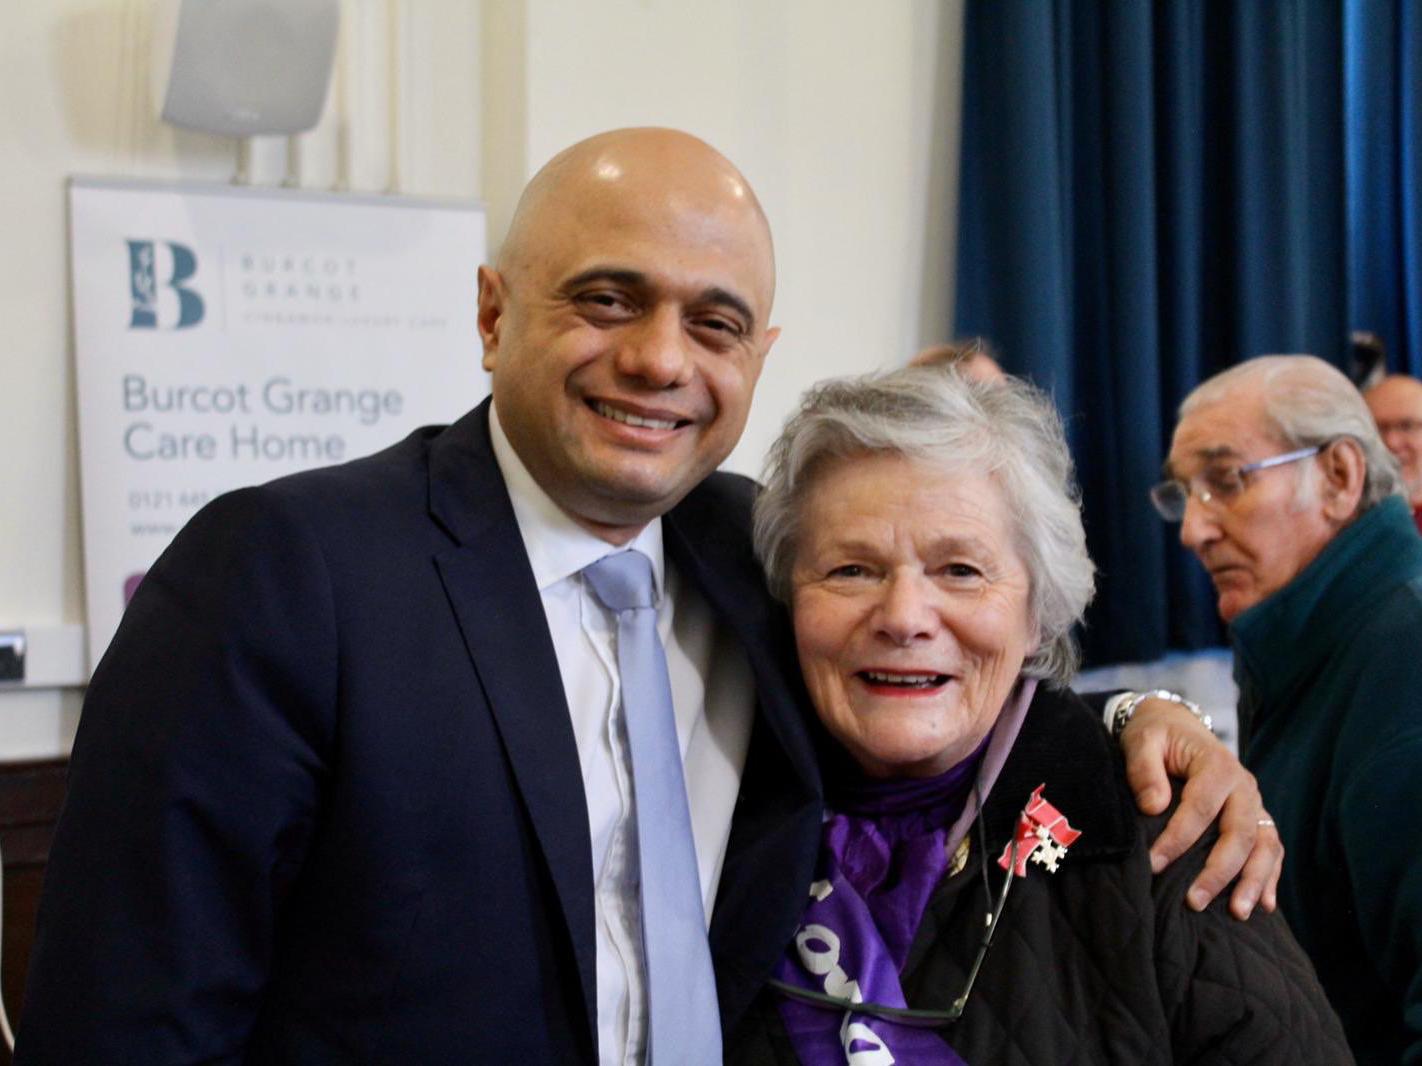 Sajid Javid was Chancellor of the Exchequer from 24 July 2019 to 13 February 2020